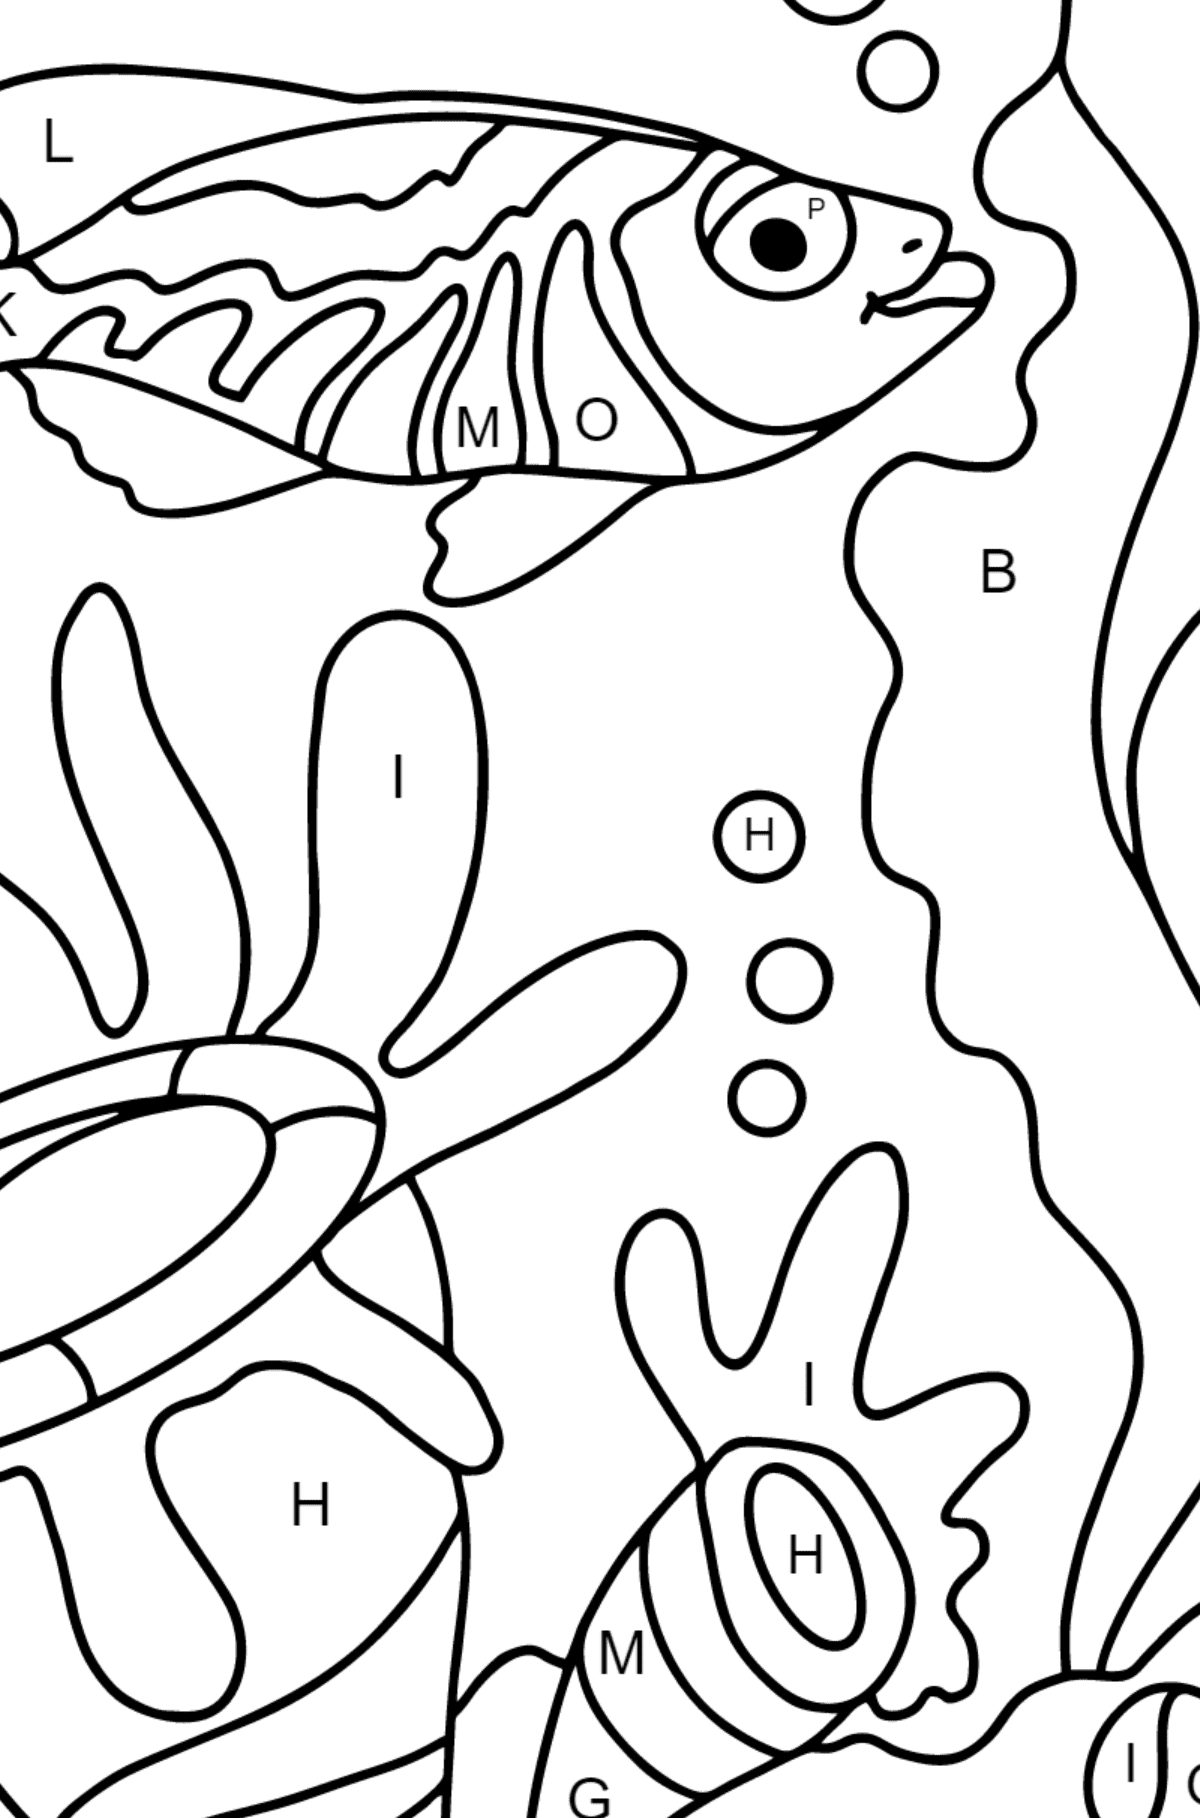 Coloring Page - A Fish is Admiring the Corals - Coloring by Letters for Kids